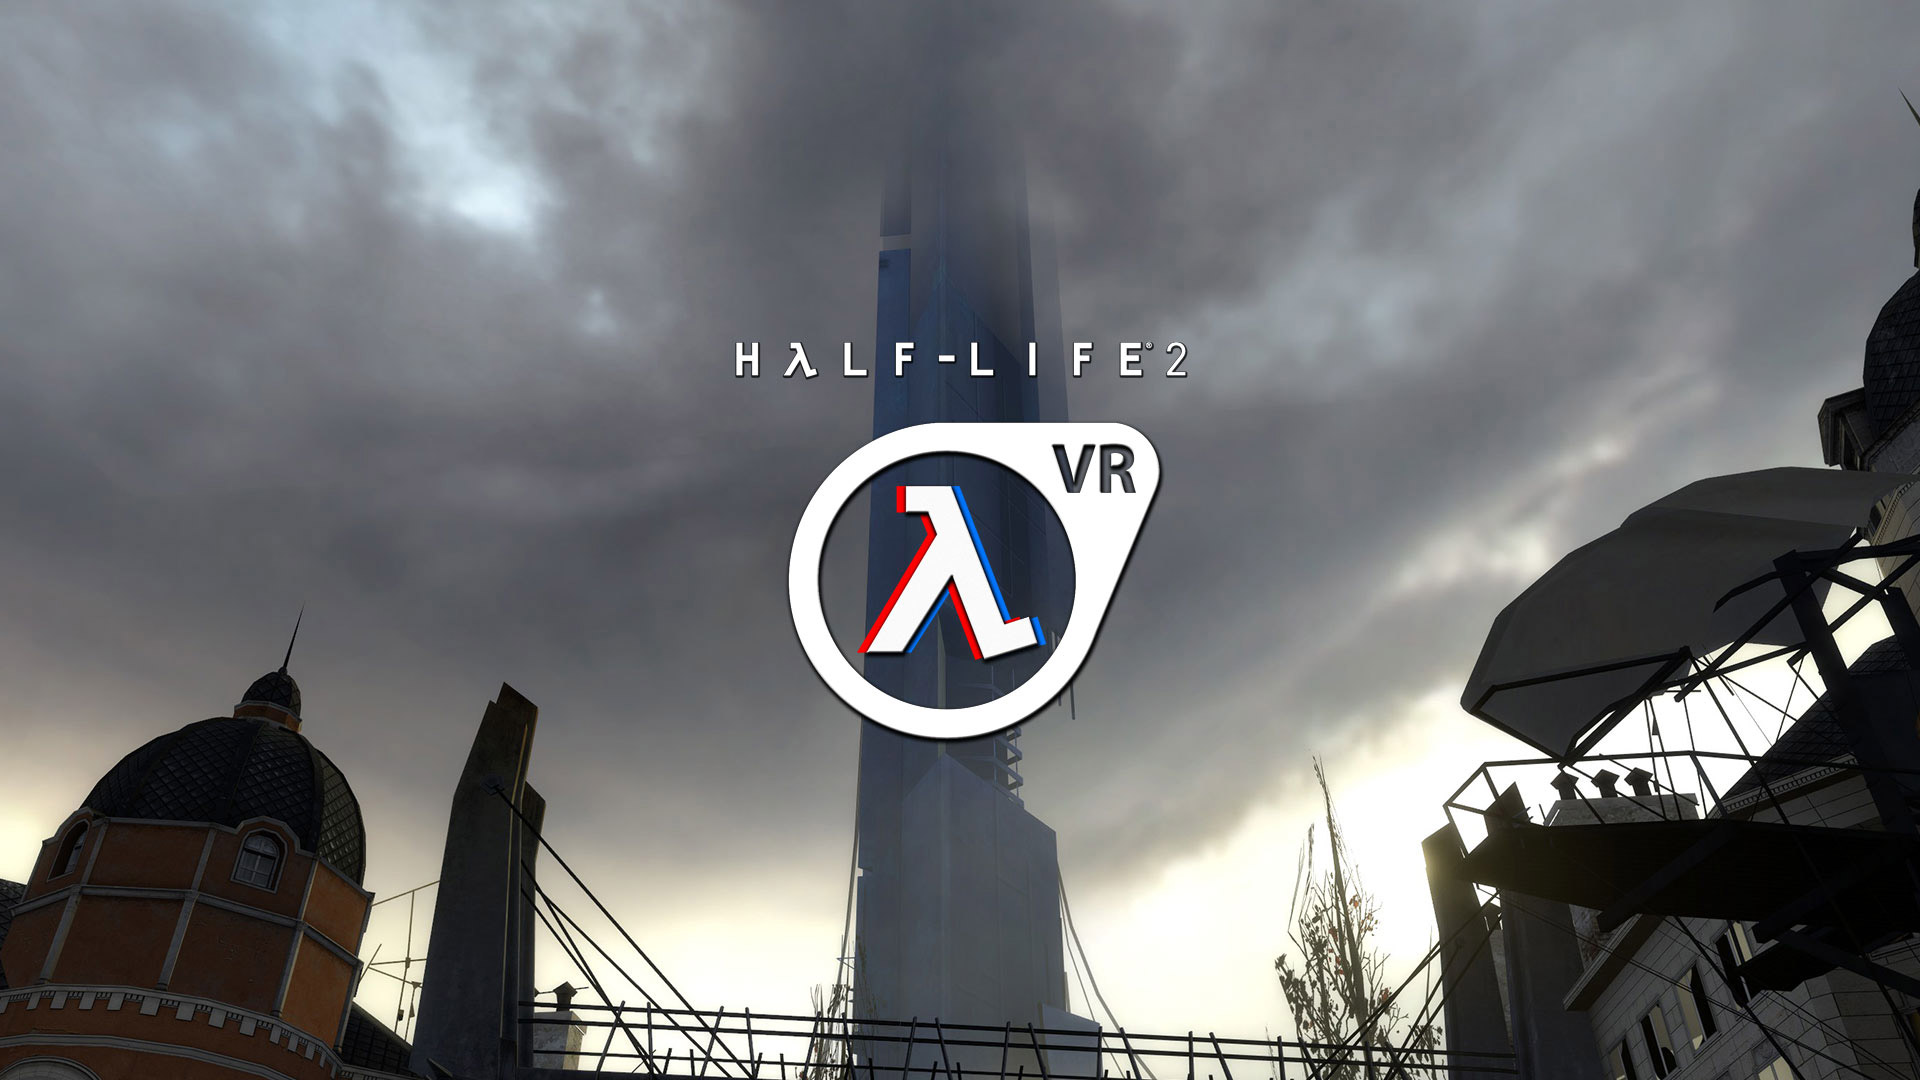 Long Defunct ‘Half-Life 2’ VR Mod Shows Off New Progress with Manual Reloading & Ladder Climbing